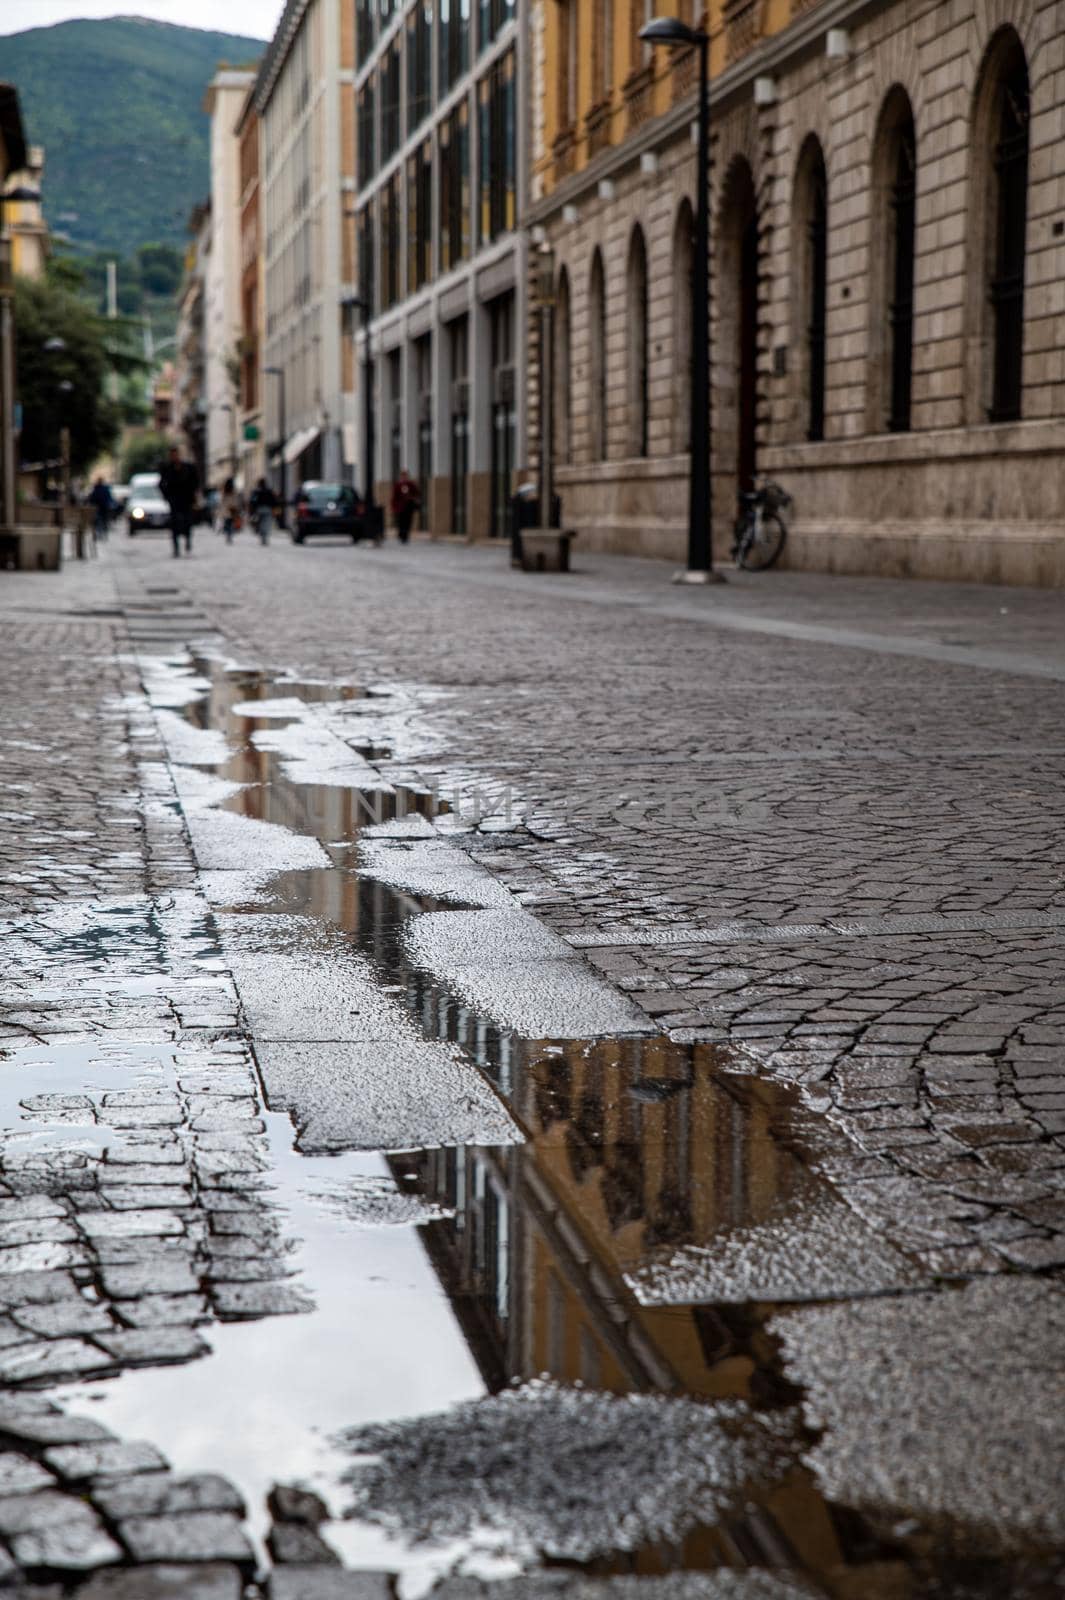 reflects water and reflects buildings after a downpour